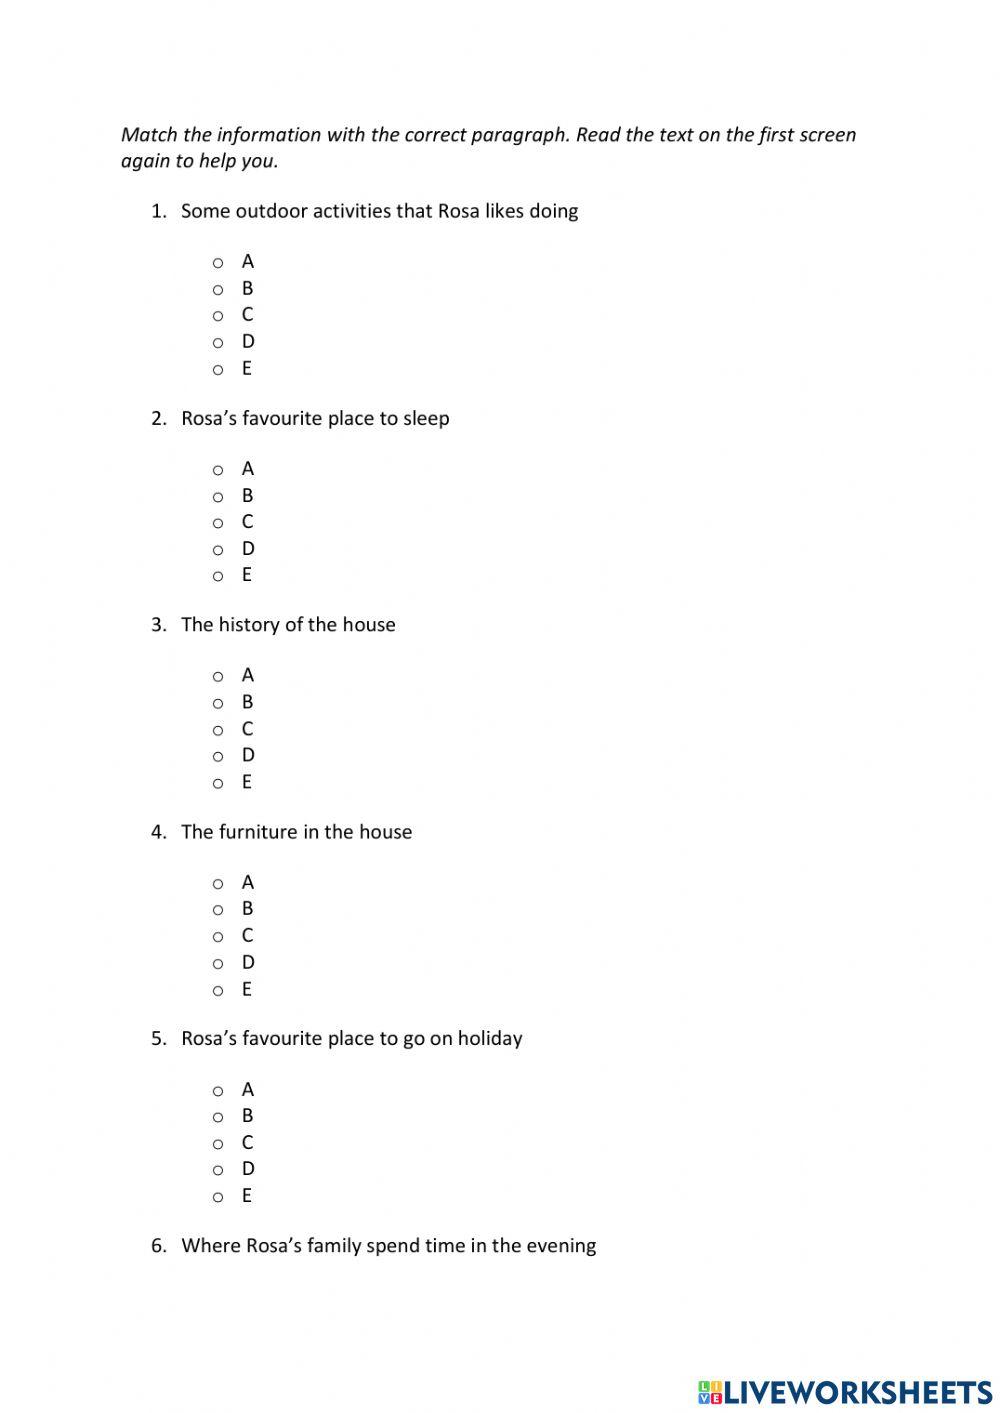 IE0, Unit 2, Reading and Writing, Exercise 5